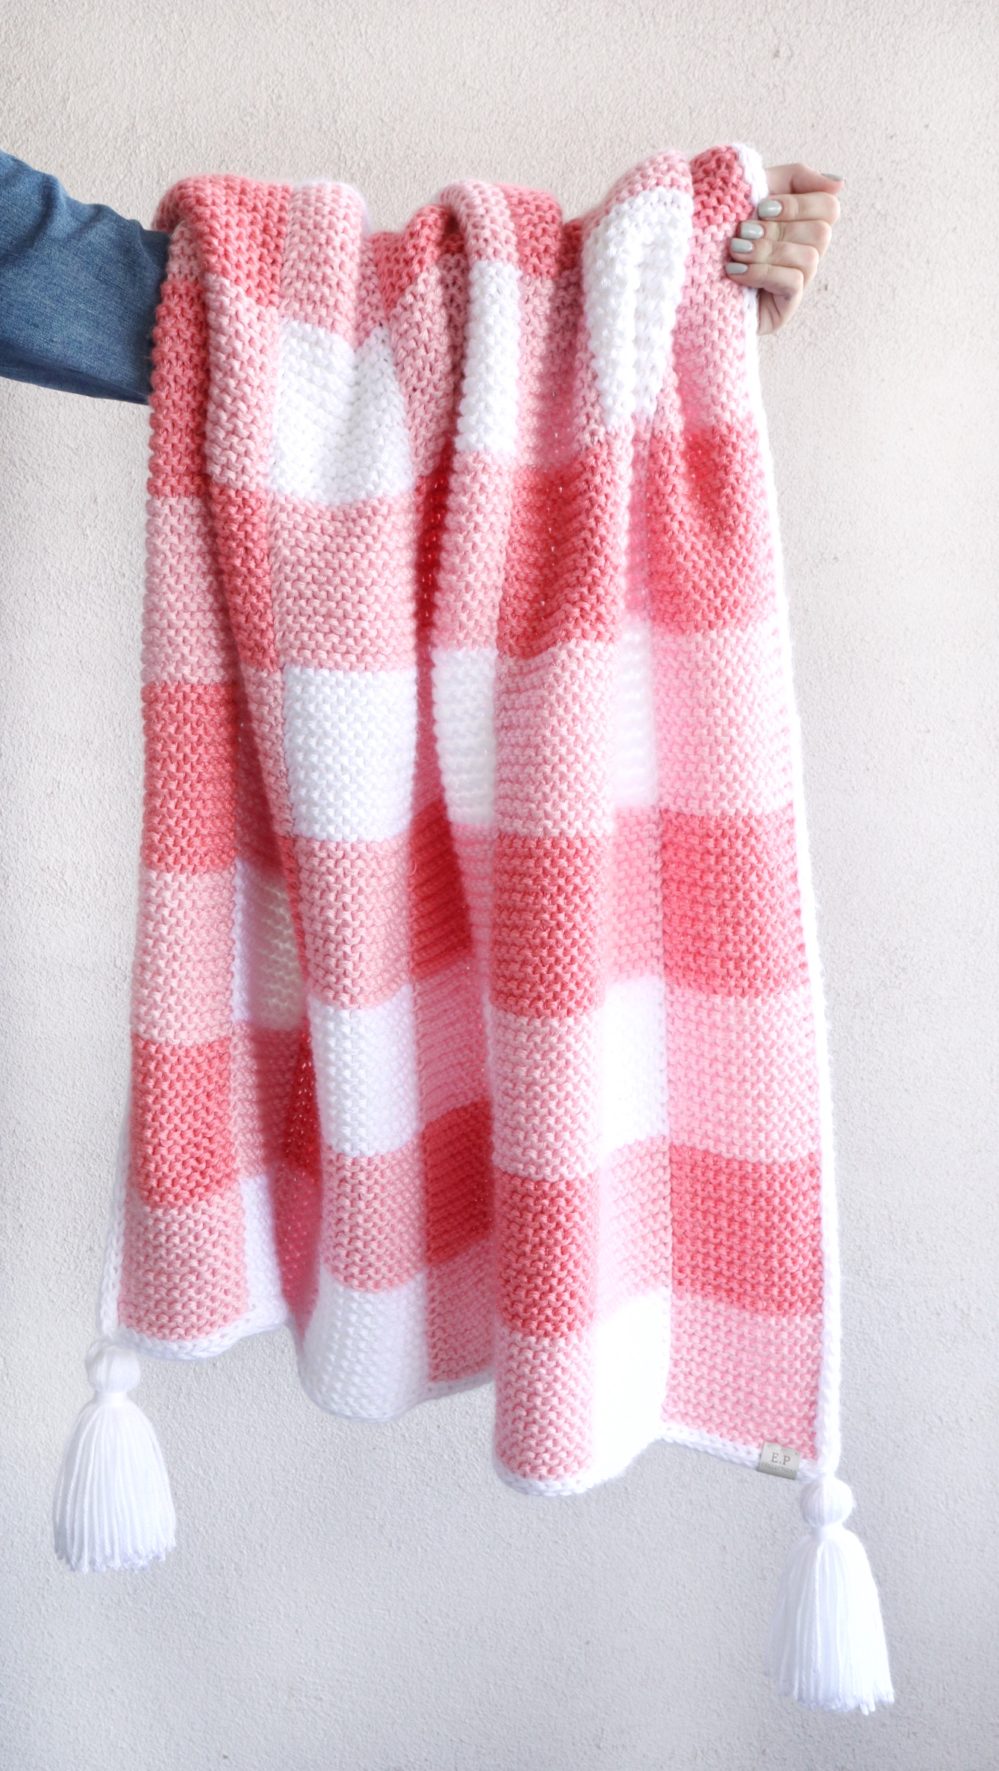 Simple Towel Knitting Pattern - Knitting in the Park